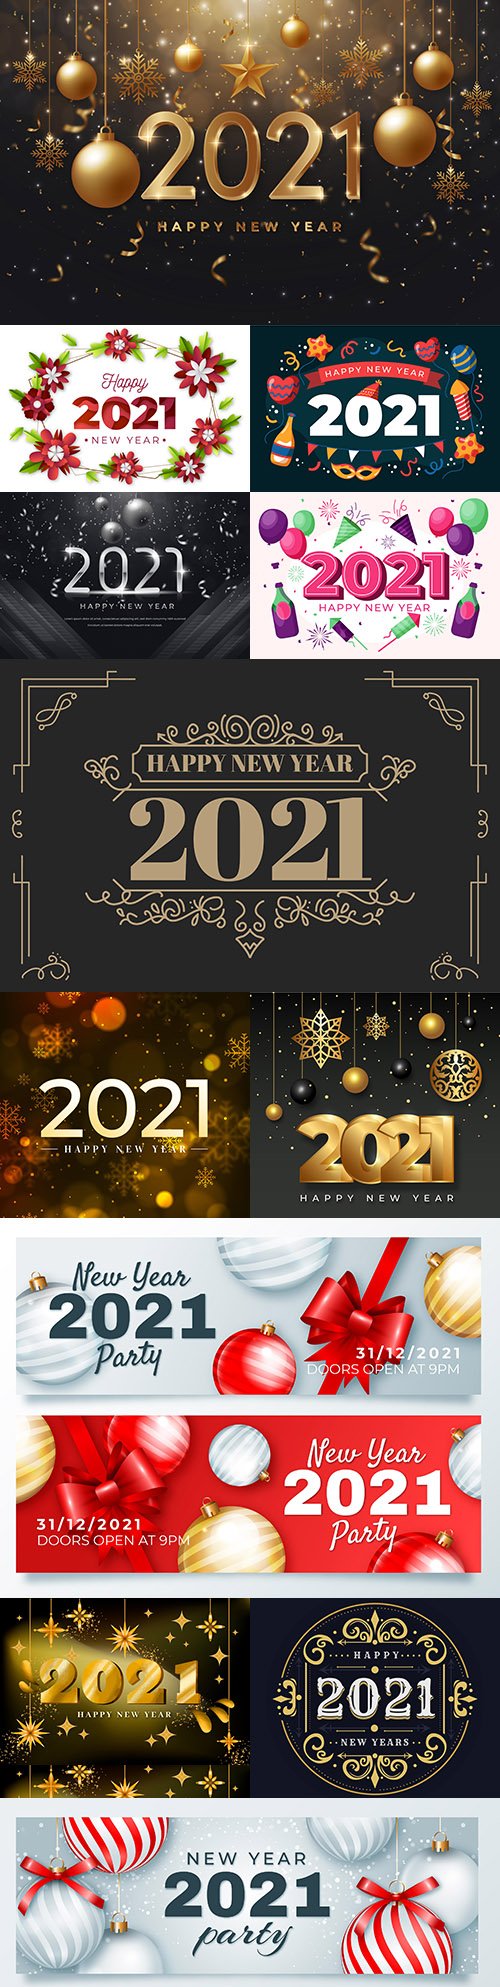 Greeting New Year 2021 with elegant and decorative elements